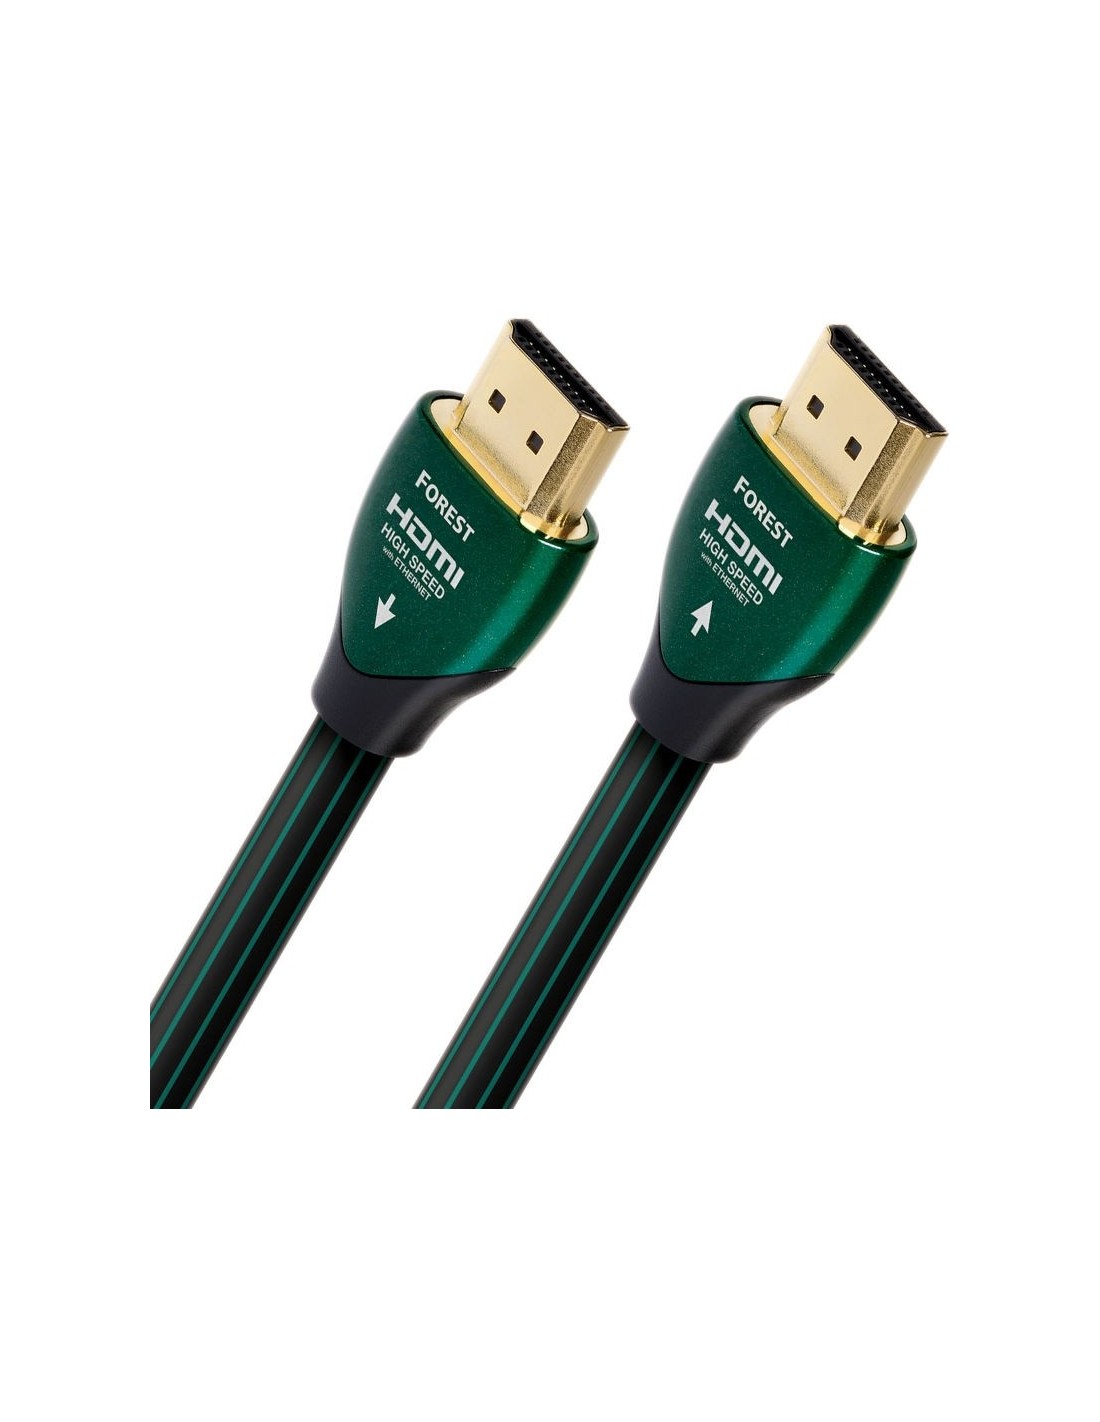 https://www.passionhomecinema.fr/16248-thickbox_default/audioquest-forest-cable-hdmi-vert.jpg